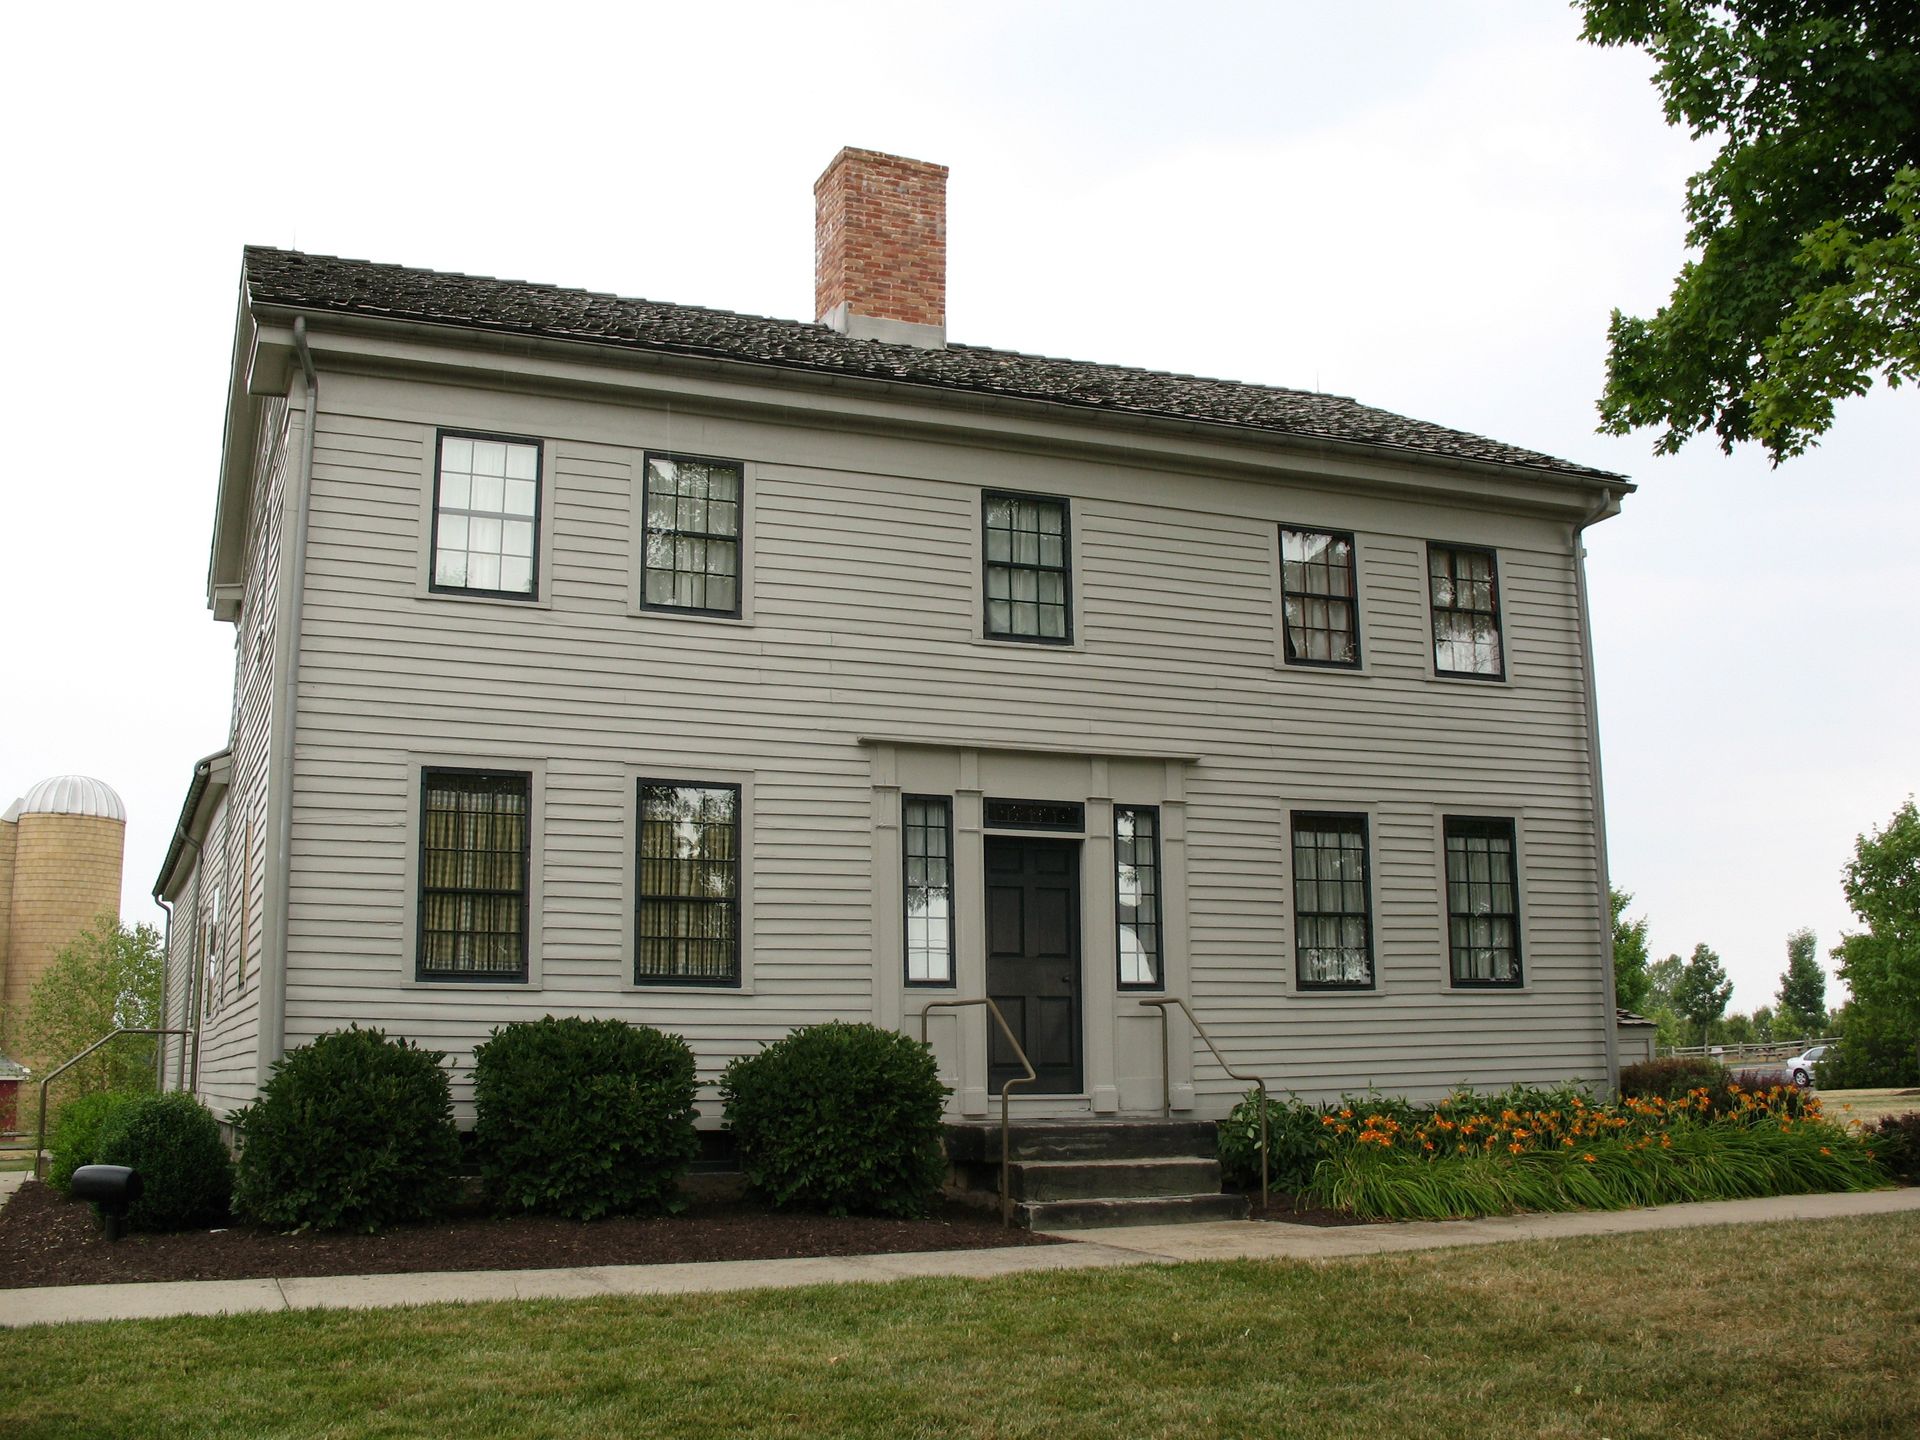 A view of the John Johnson home exterior in Hiram, Ohio.